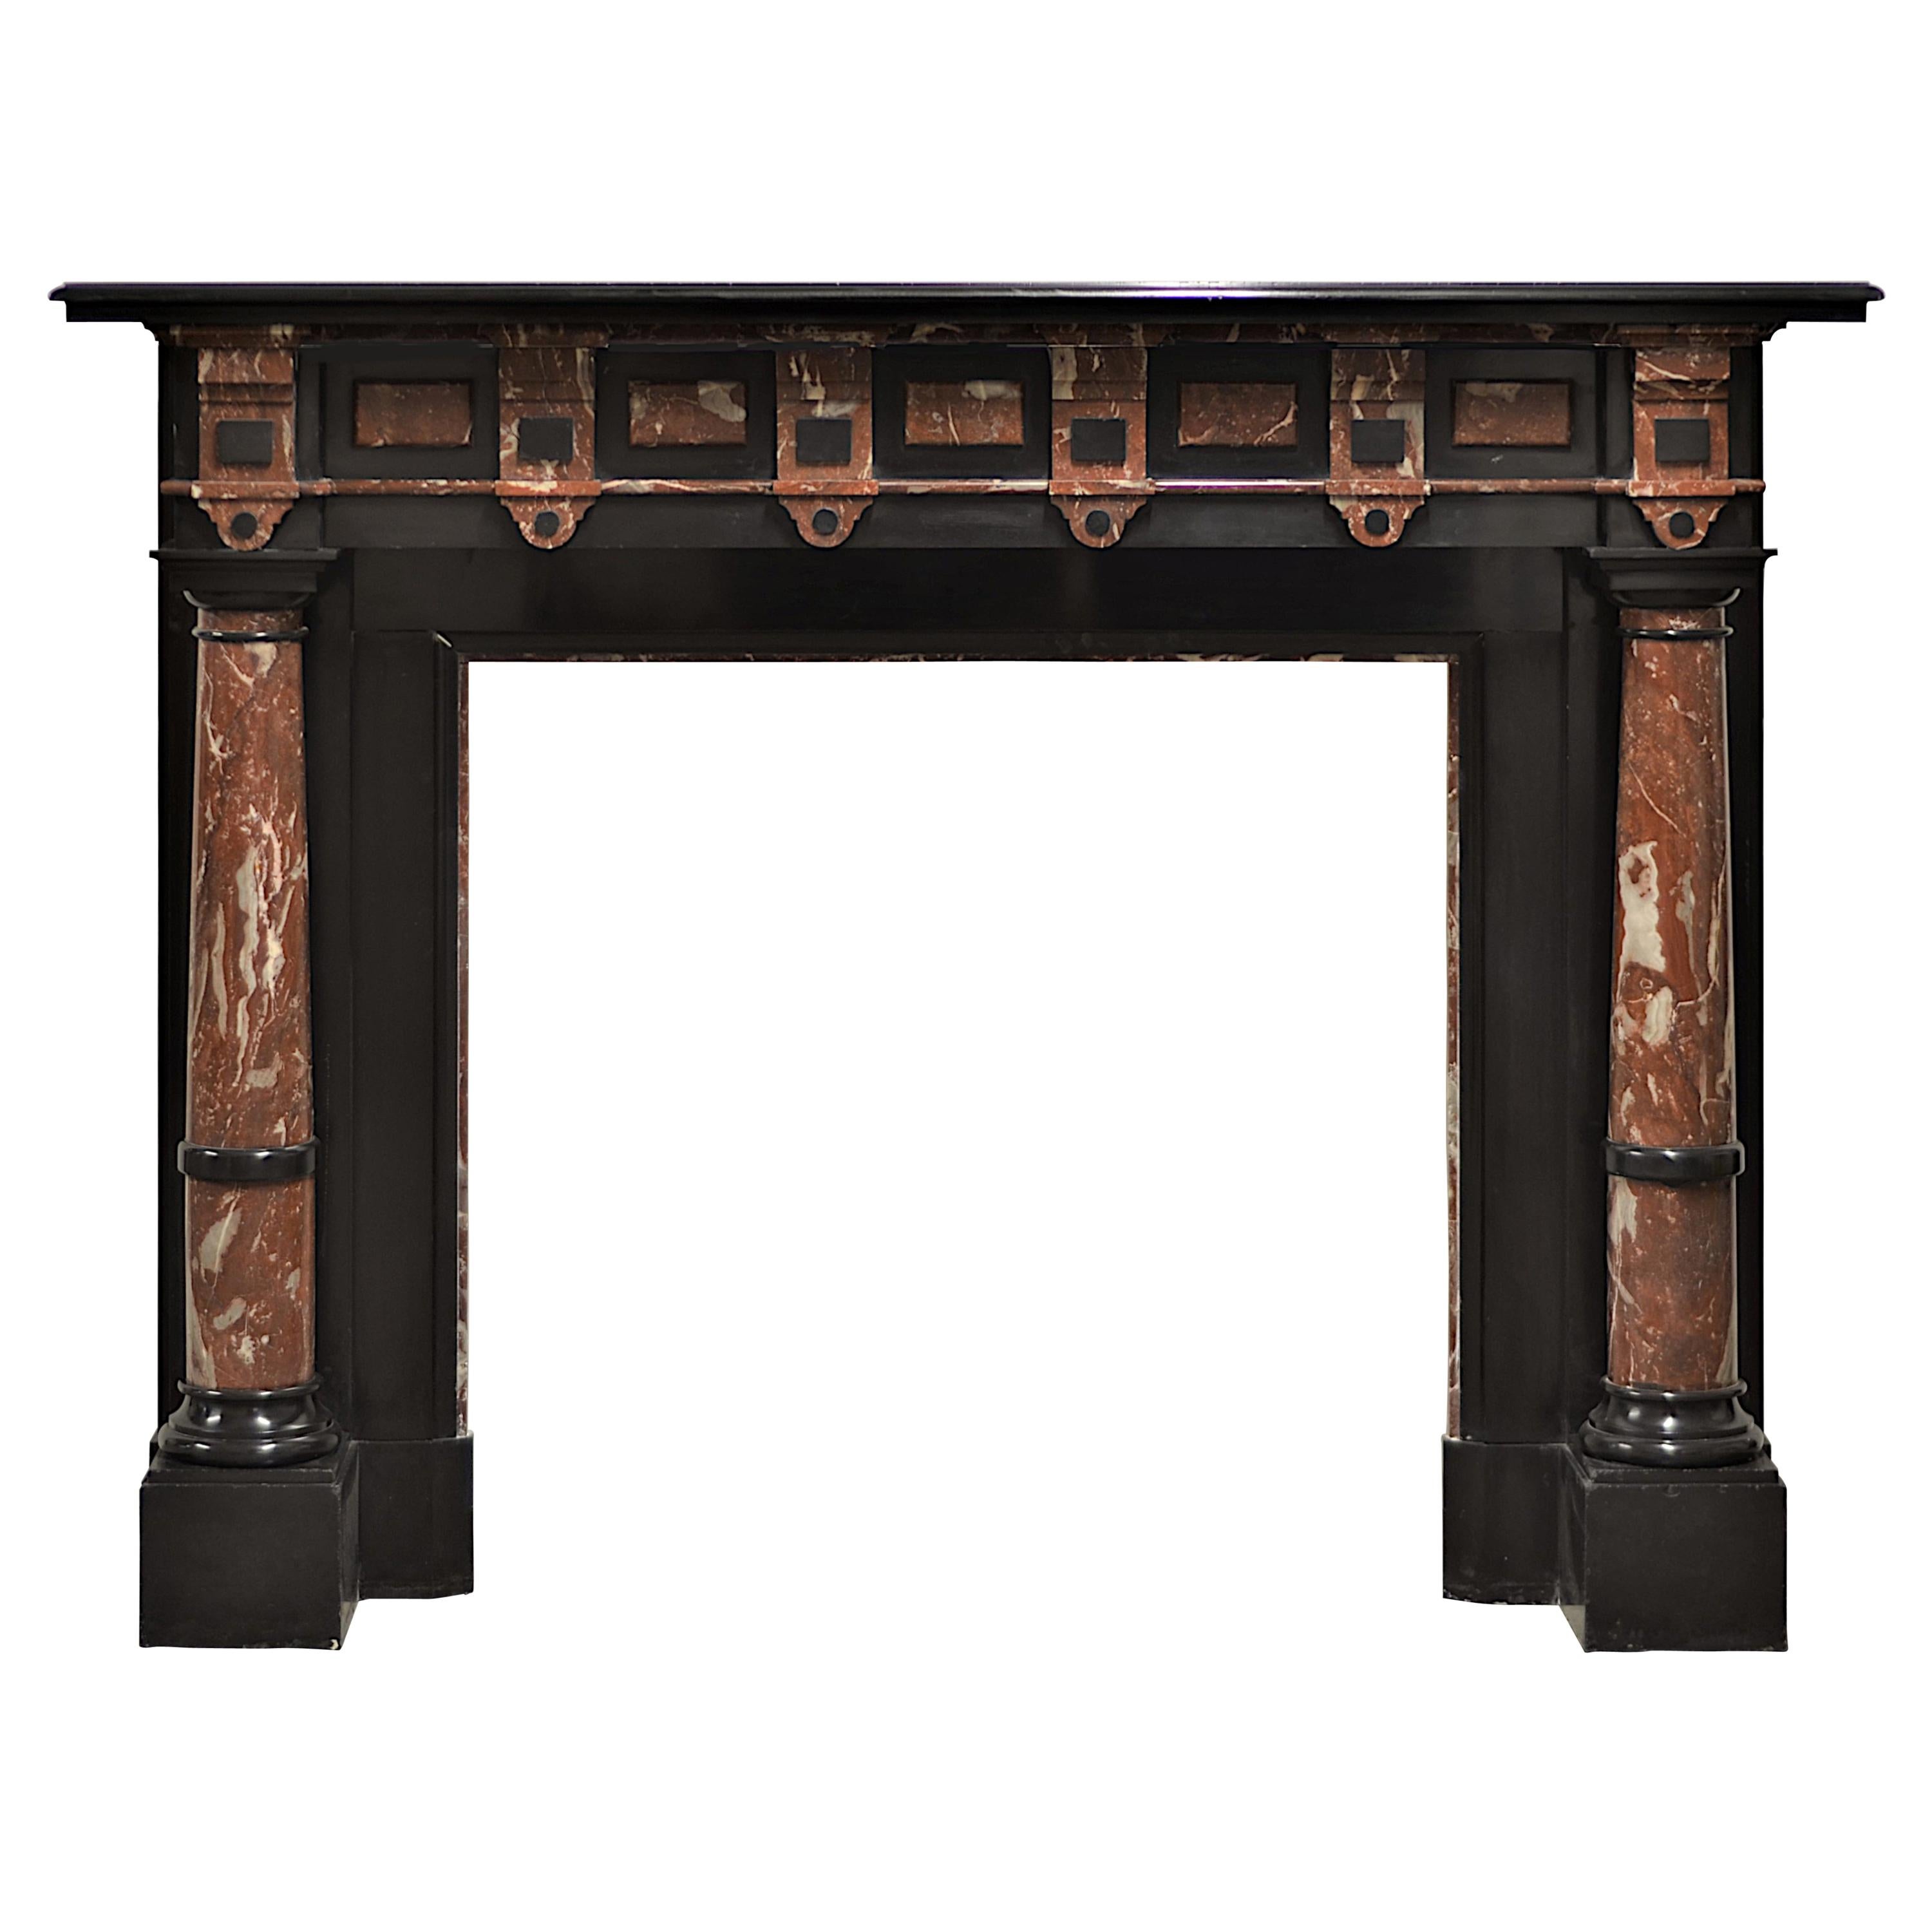 Late 19th C Black Marble Fireplace Mantel For Sale